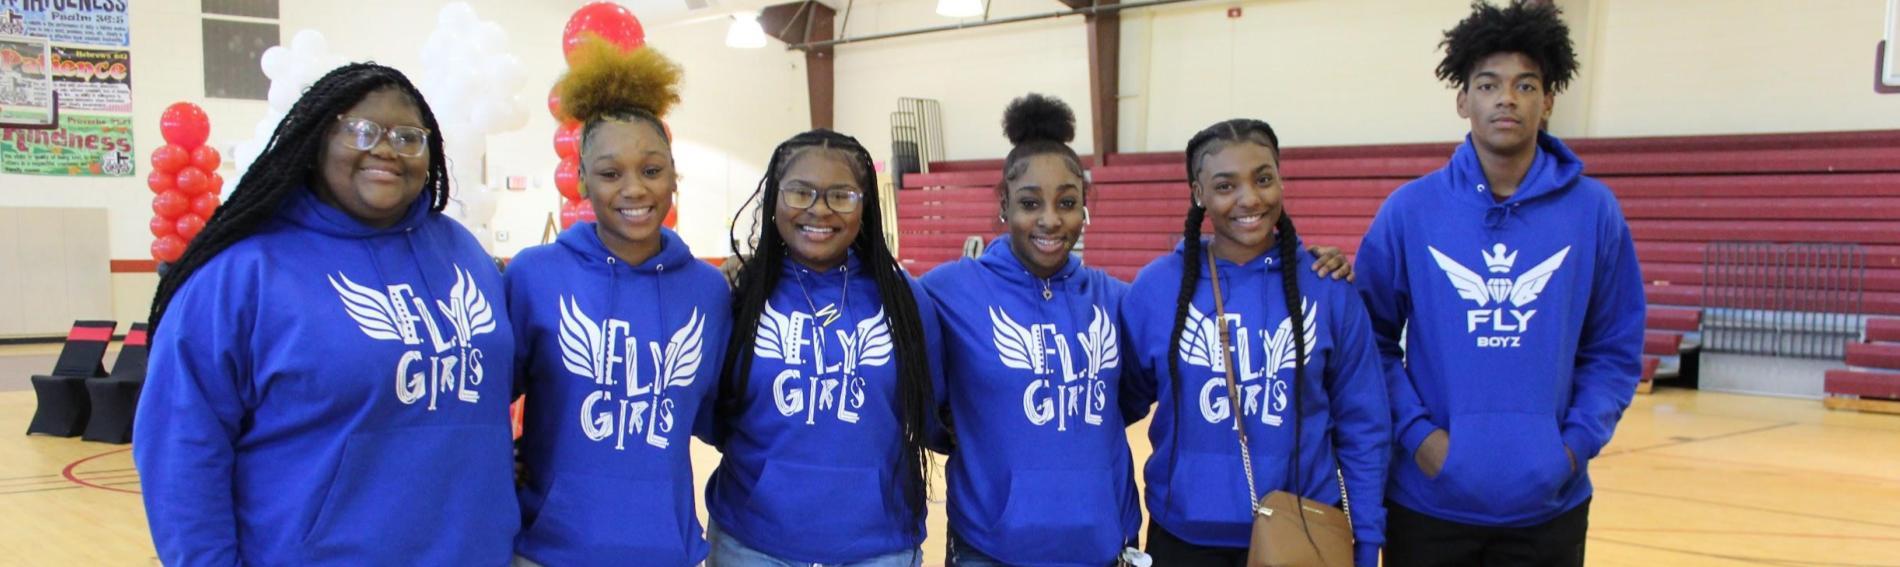 Five girls and a boy pose in the GWCFC gym wearing matching blue hoodies that say FLY girls and FLY boy 